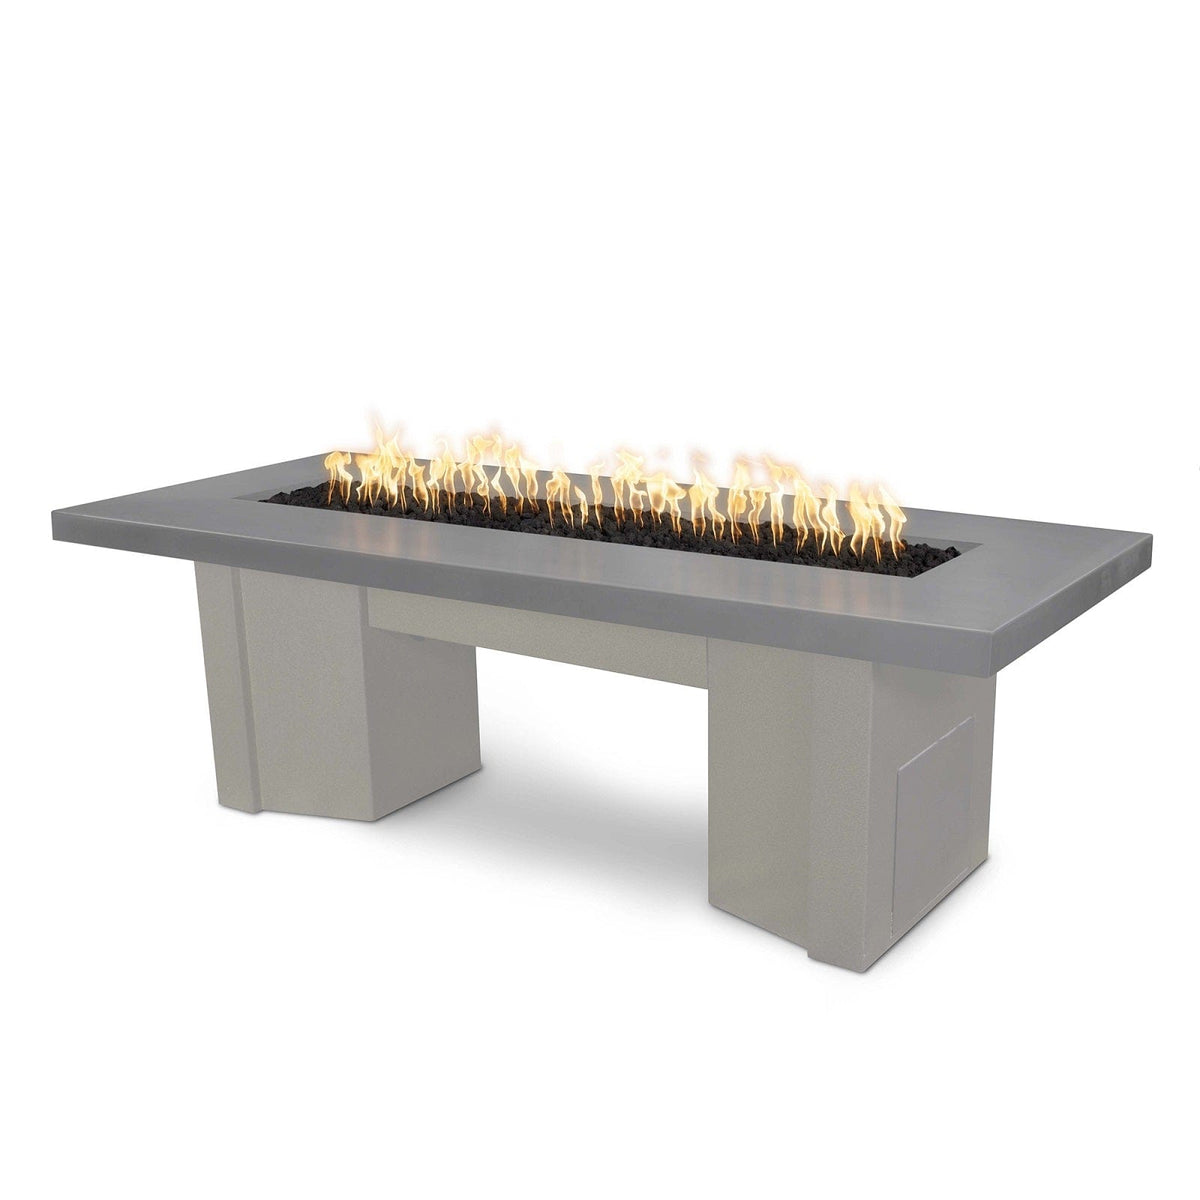 The Outdoor Plus Fire Features Natural Gray (-NGY) / Pewter Powder Coated Steel (-PEW) The Outdoor Plus 78&quot; Alameda Fire Table Smooth Concrete in Liquid Propane - Match Lit with Flame Sense System / OPT-ALMGFRC78FSML-LP